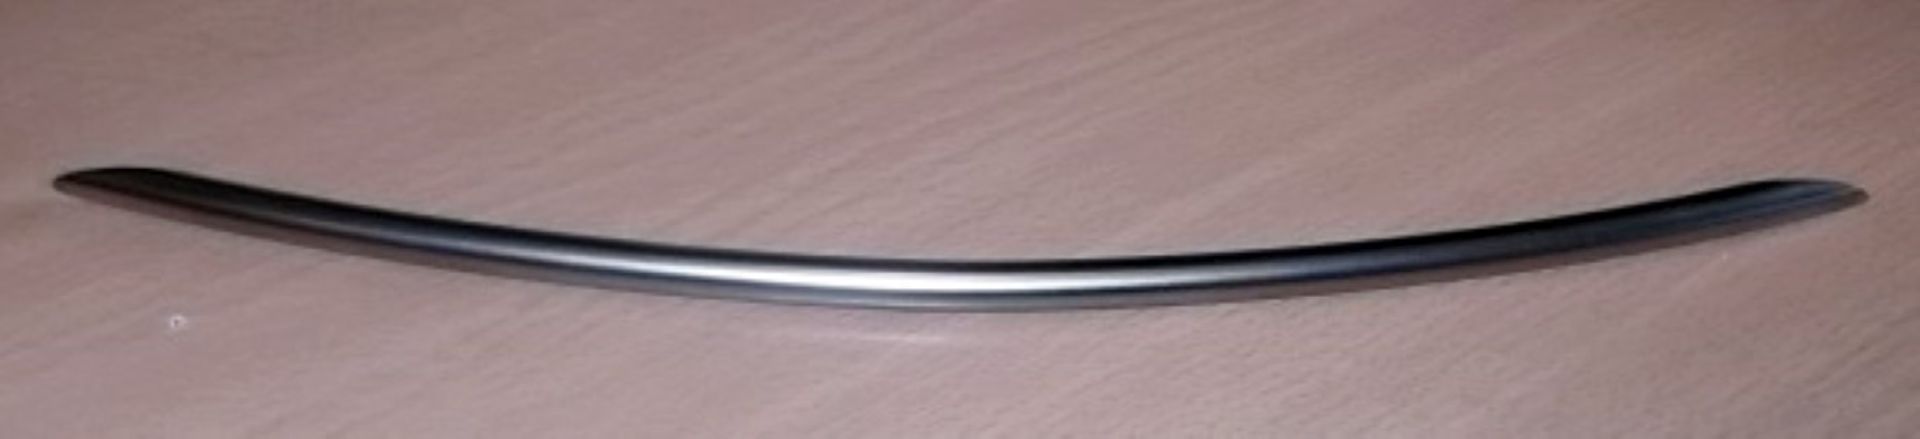 100 x BOW Handle Kitchen Door Handles By Crestwood - 320mm - New Stock - Brushed Nickel Finish - - Image 7 of 10